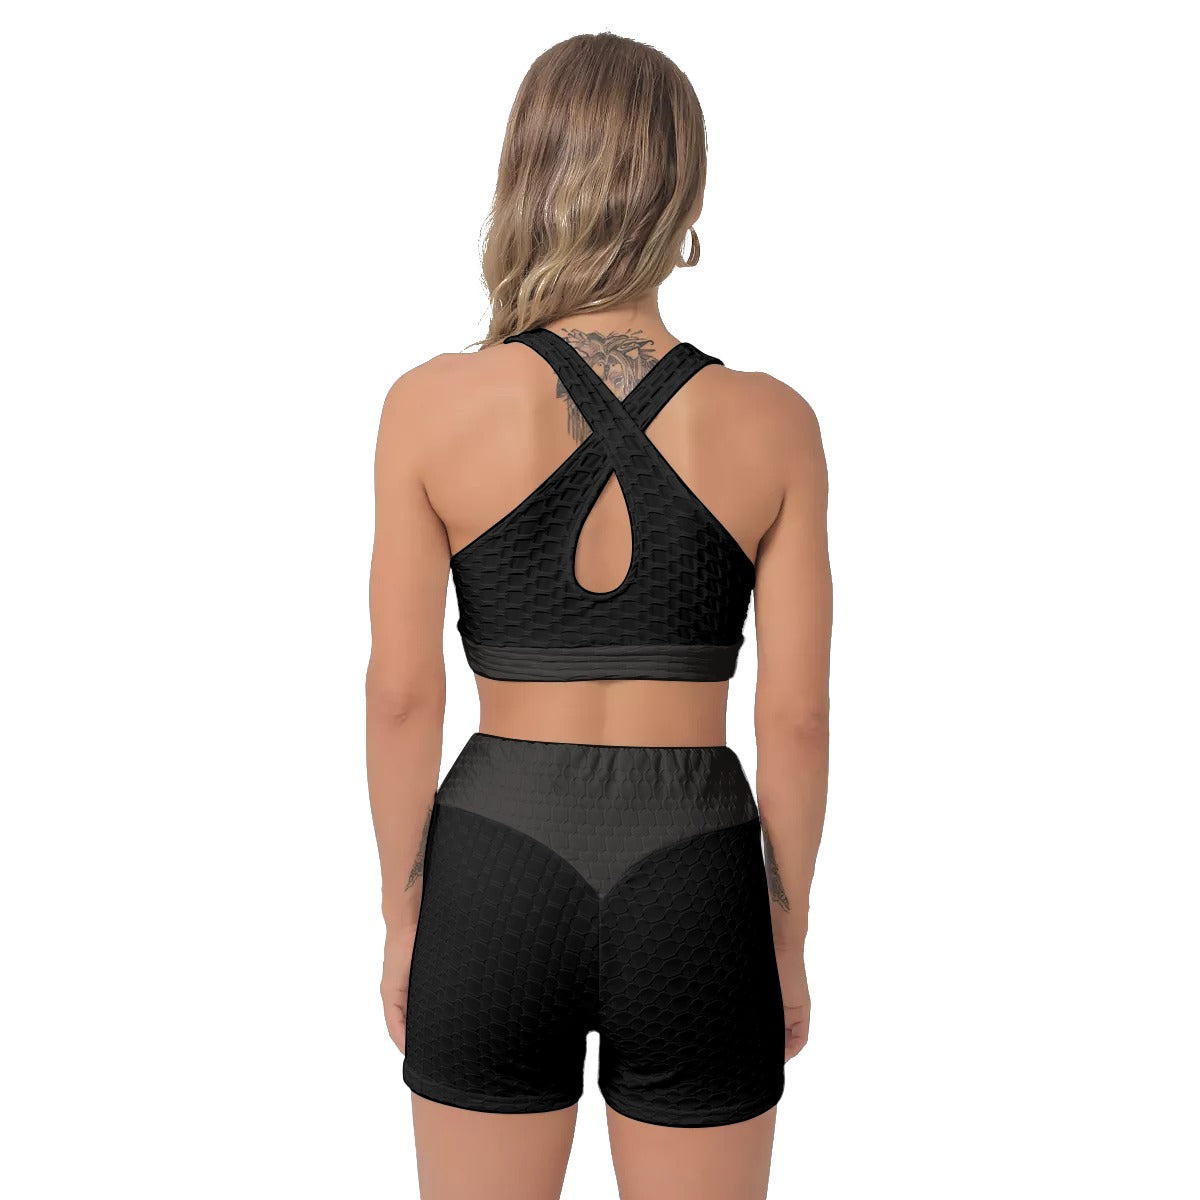 Women's Sports and Yoga Bra Suit - Personal Hour for Yoga and Meditations 